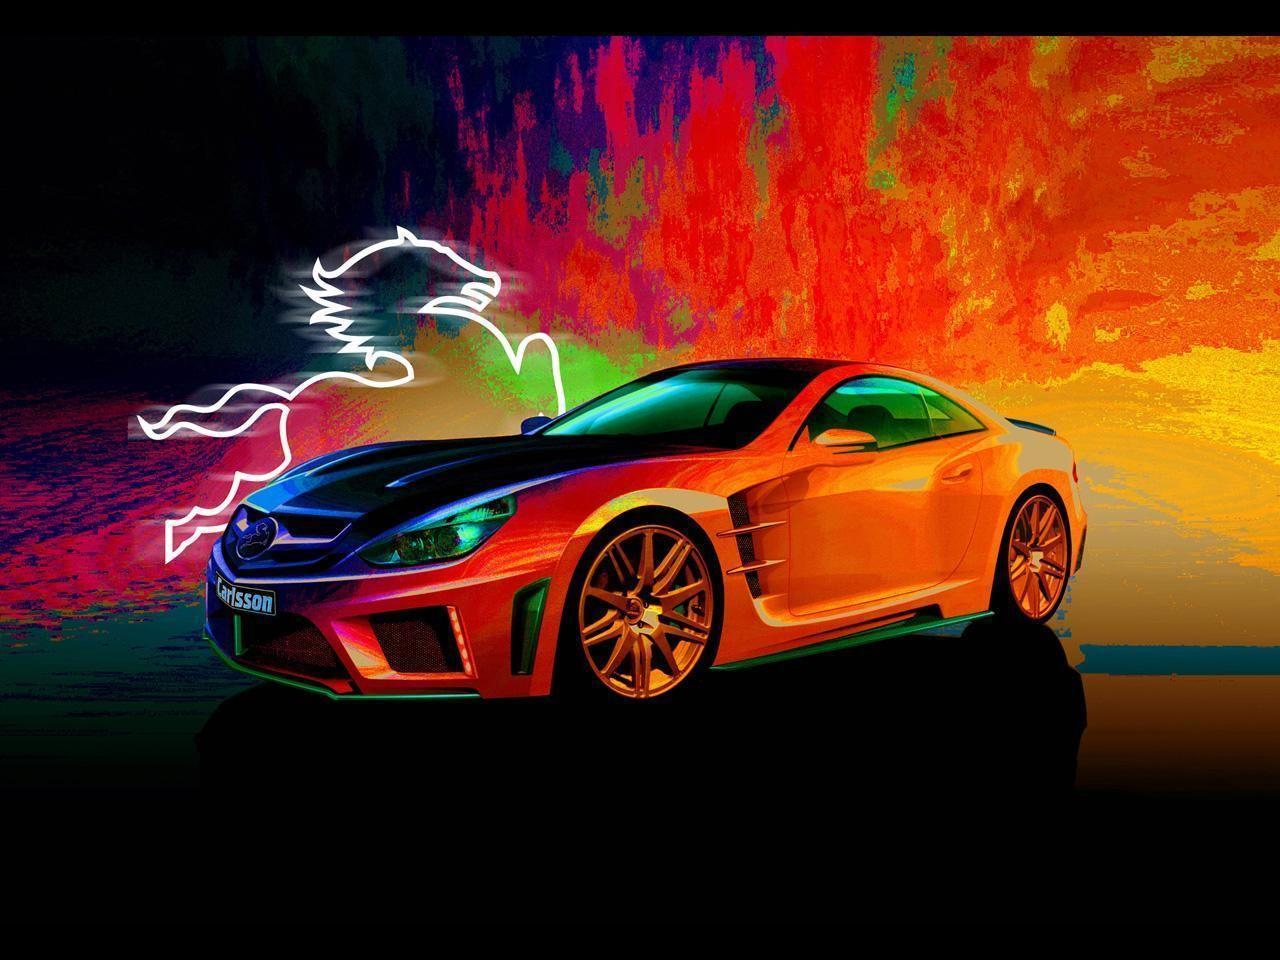 Strikingly Awesome Car Wallpaper to Revamp your Desktops